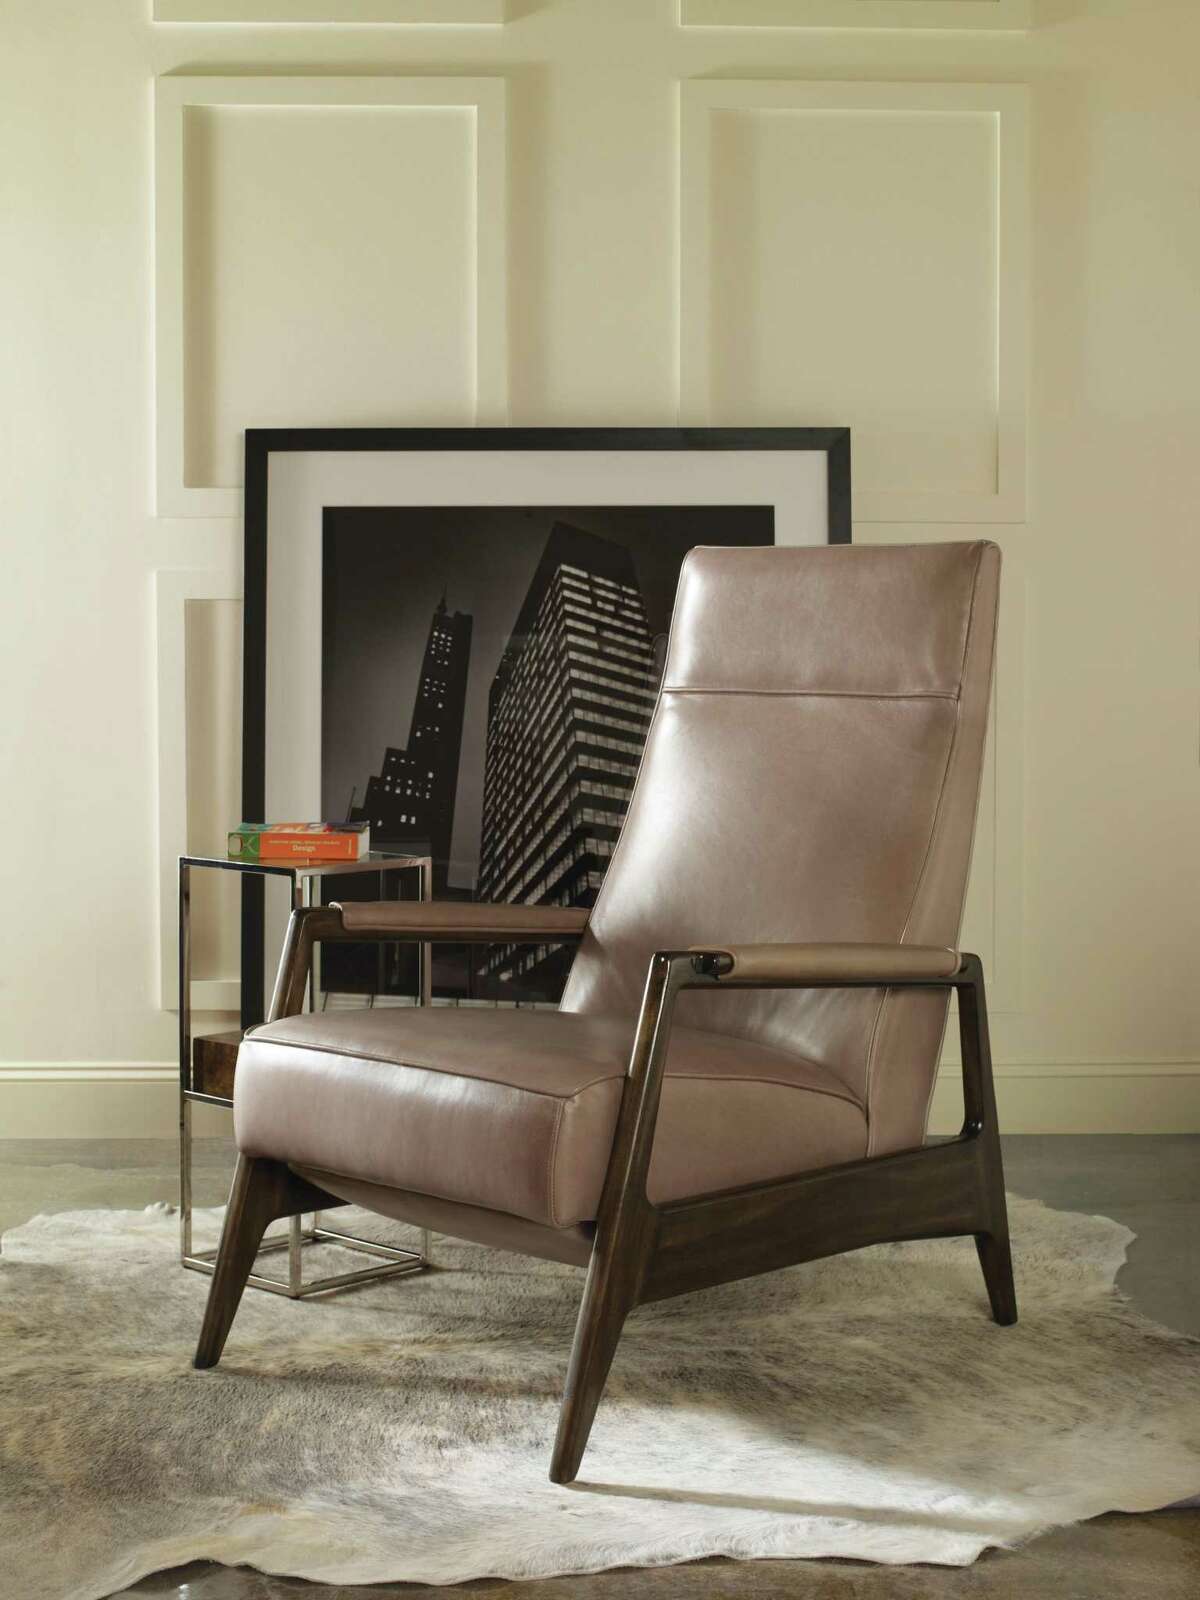 Vanguard's Woodley recliner, available in Houston at James Craig Furnishings at the Houston Design Center.